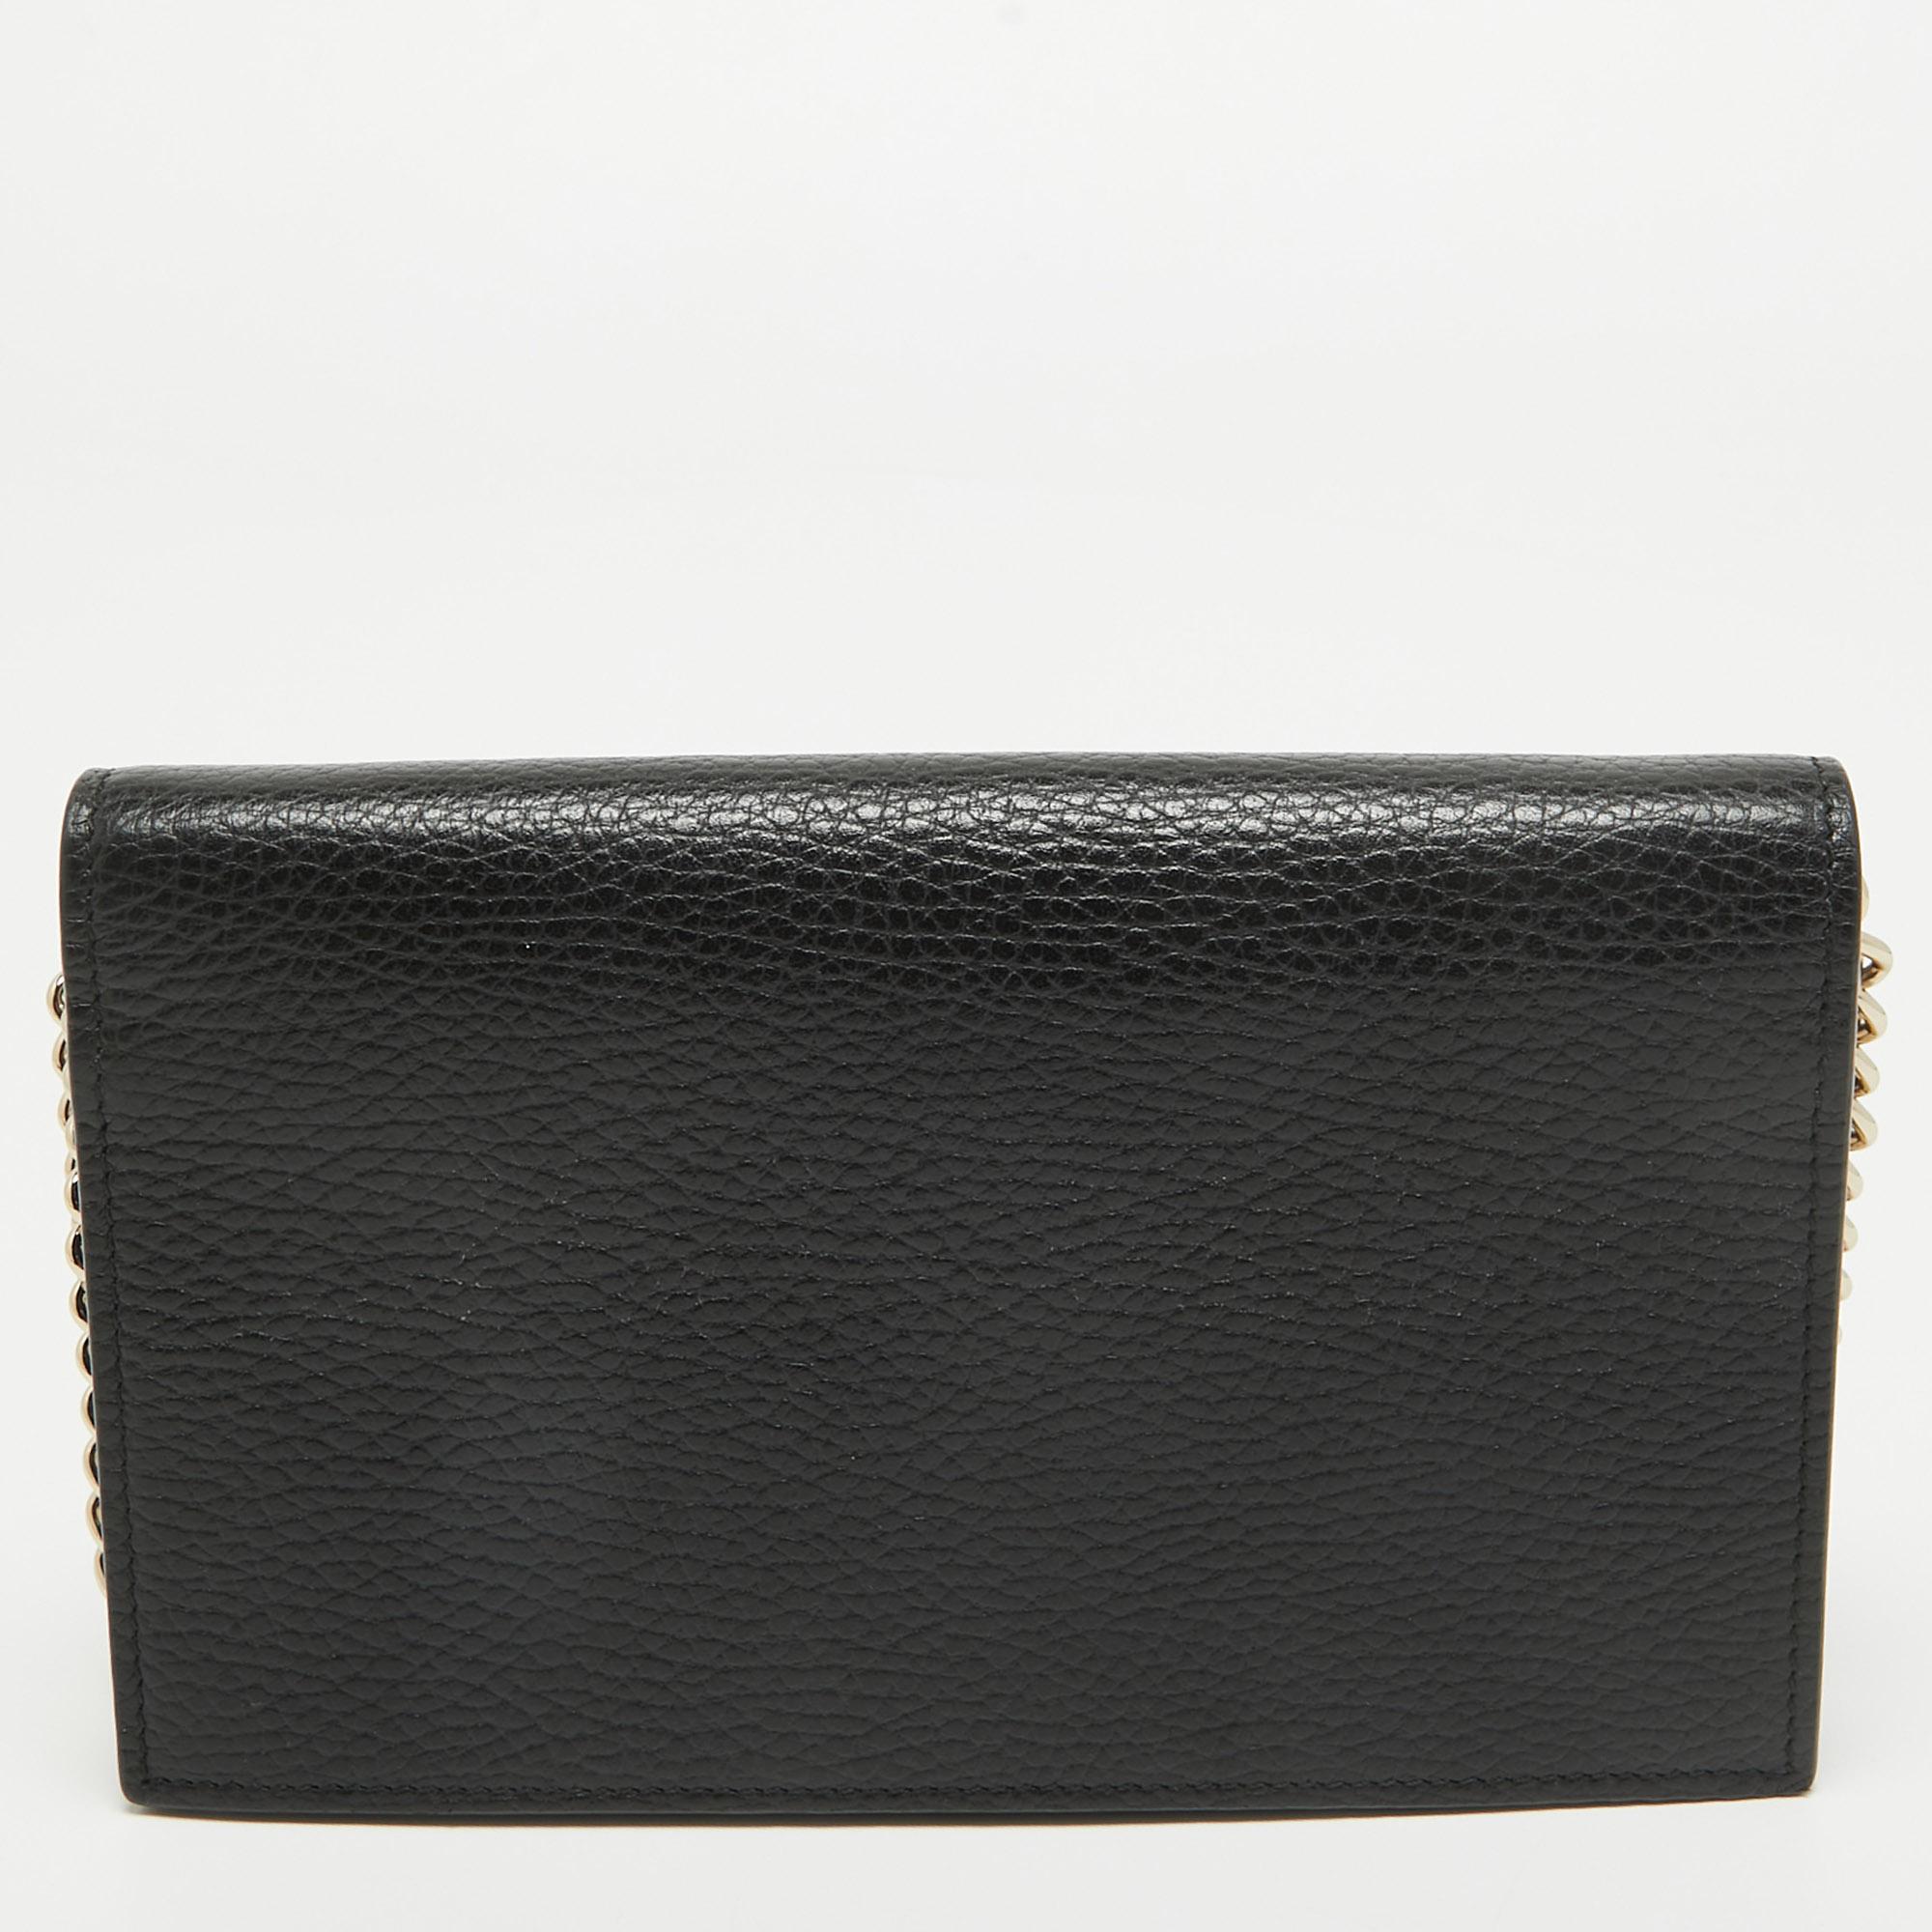 This Gucci wallet on chain is conveniently designed for easy wear. It comes with a well-spaced interior for you to arrange your cards and cash neatly. This stylish piece is complete with a chain link.

Includes: Original Dustbag,Detachable Chain